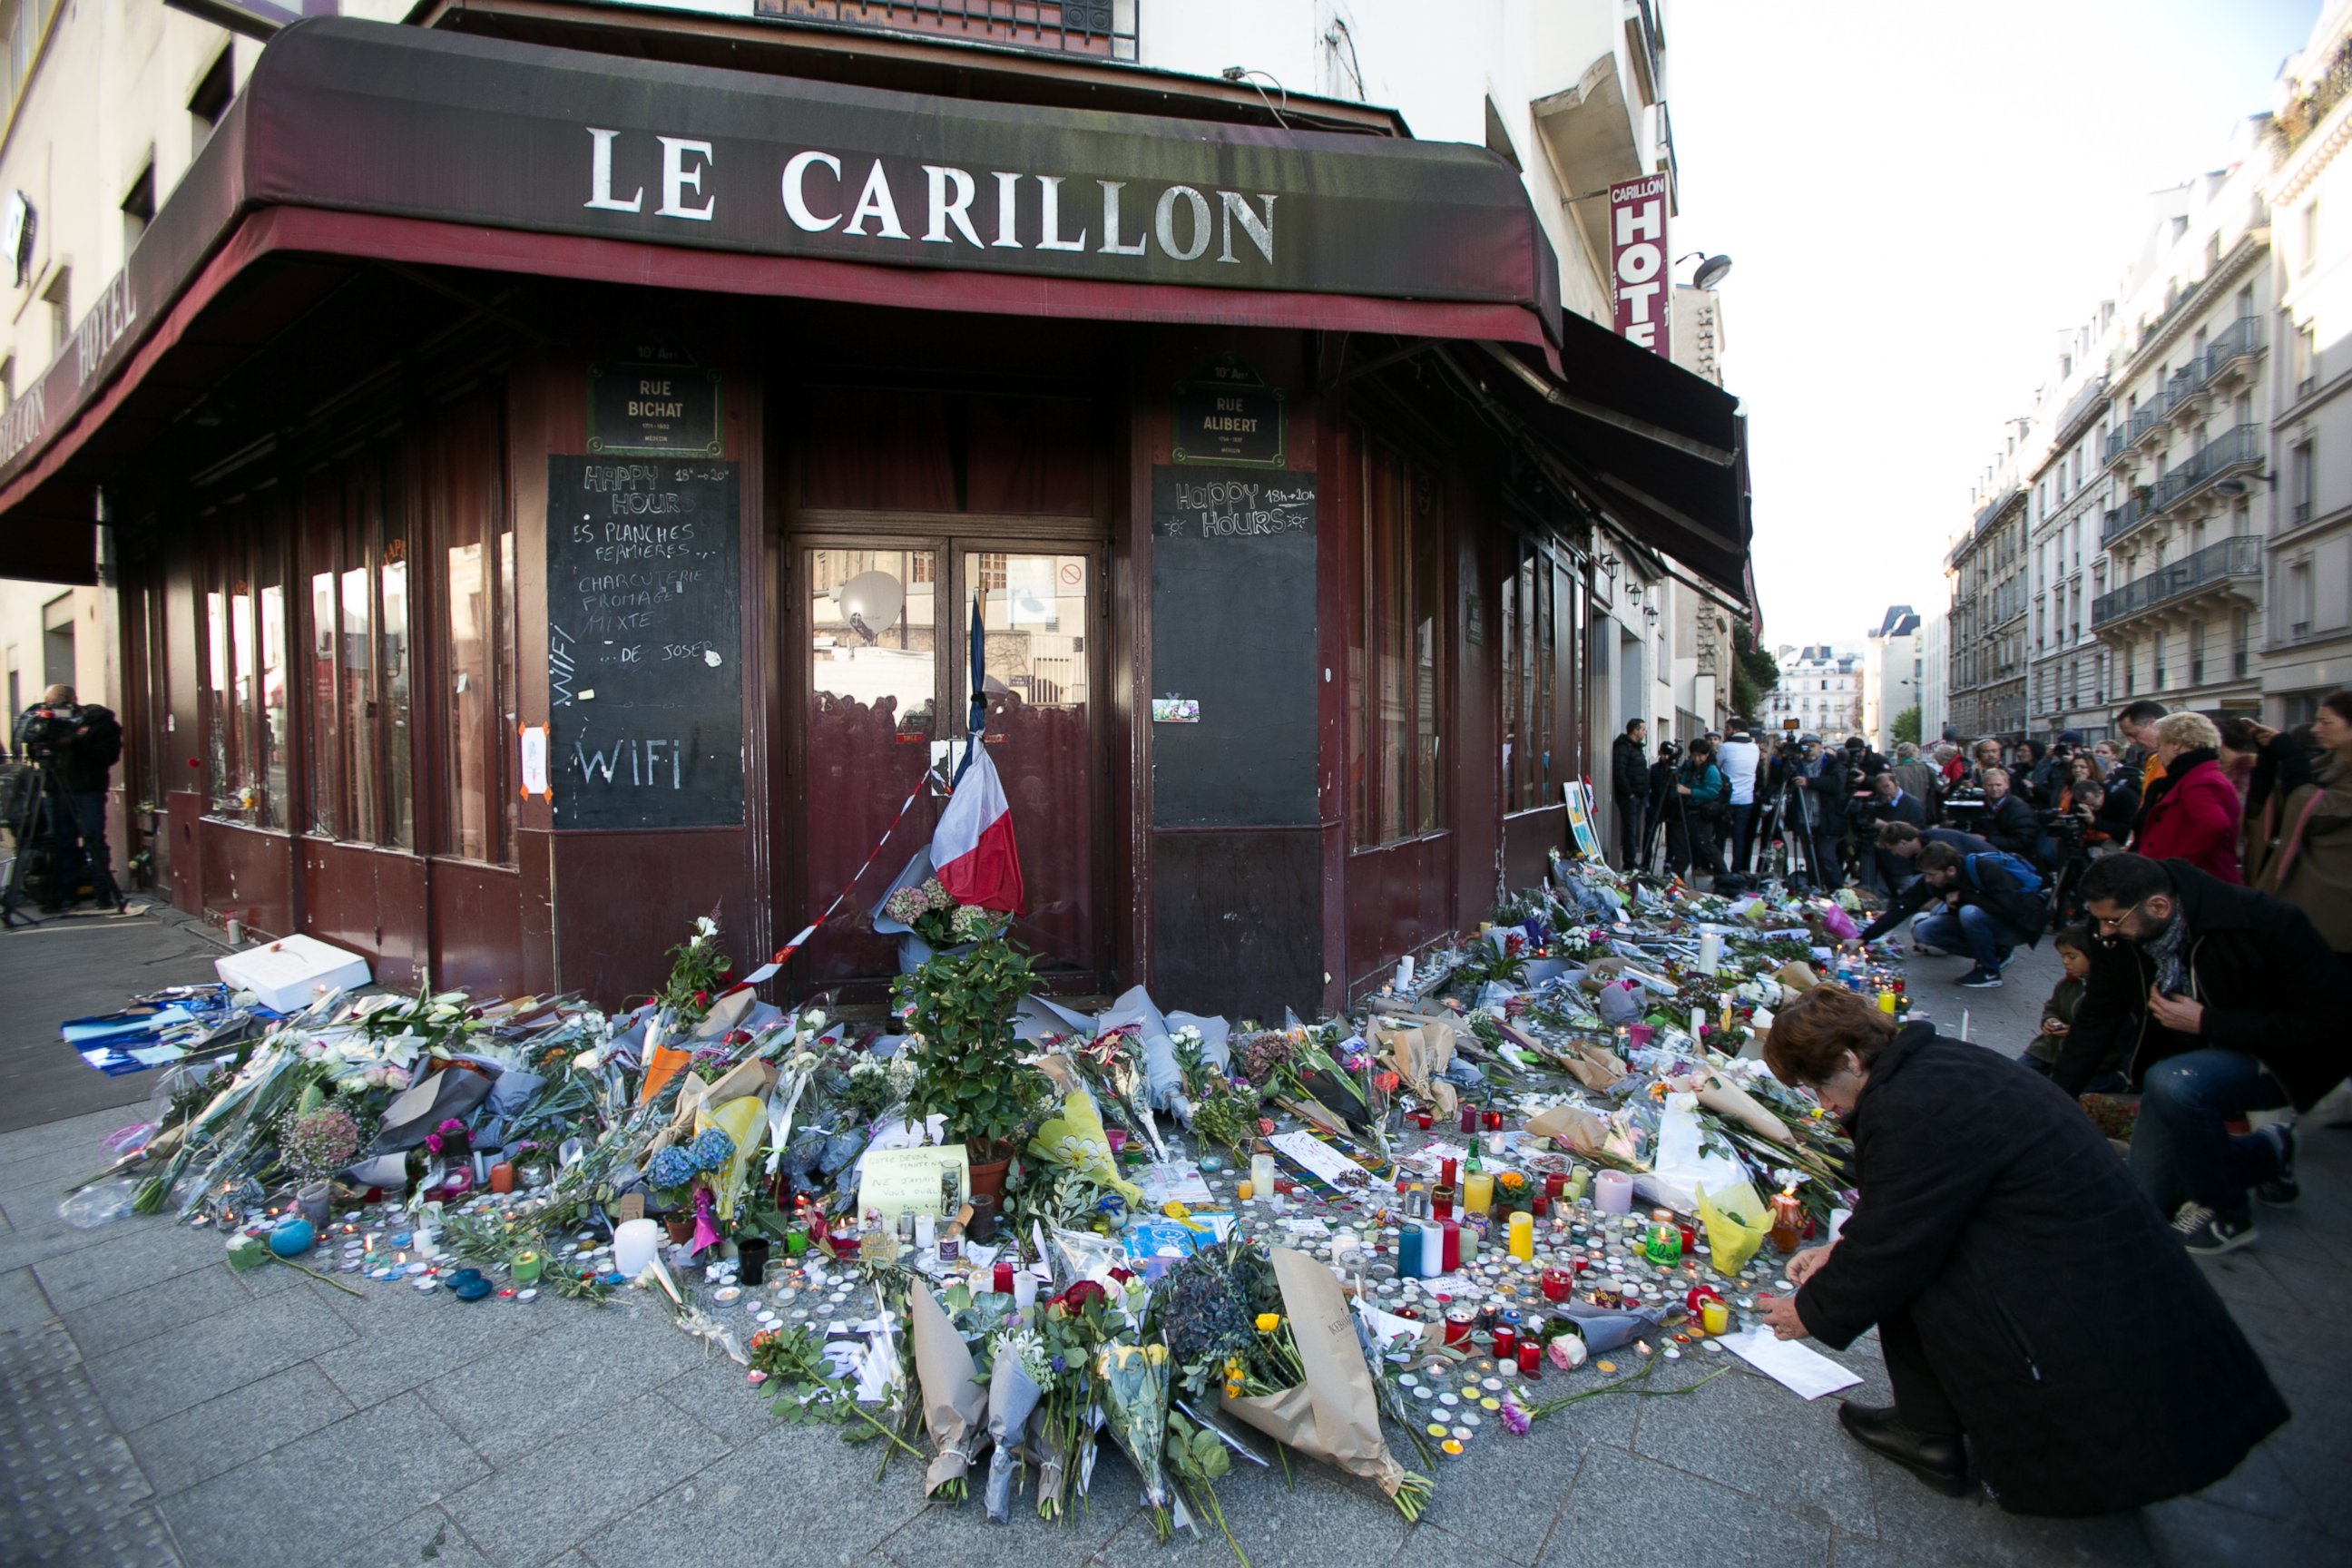 PHOTO: Members of the public gather to lay flowers and light candles at 'Le Carillon' restaurant on 'Rue Bichat' following the terrorist attacks on November 13, 2015 in Paris, France. 